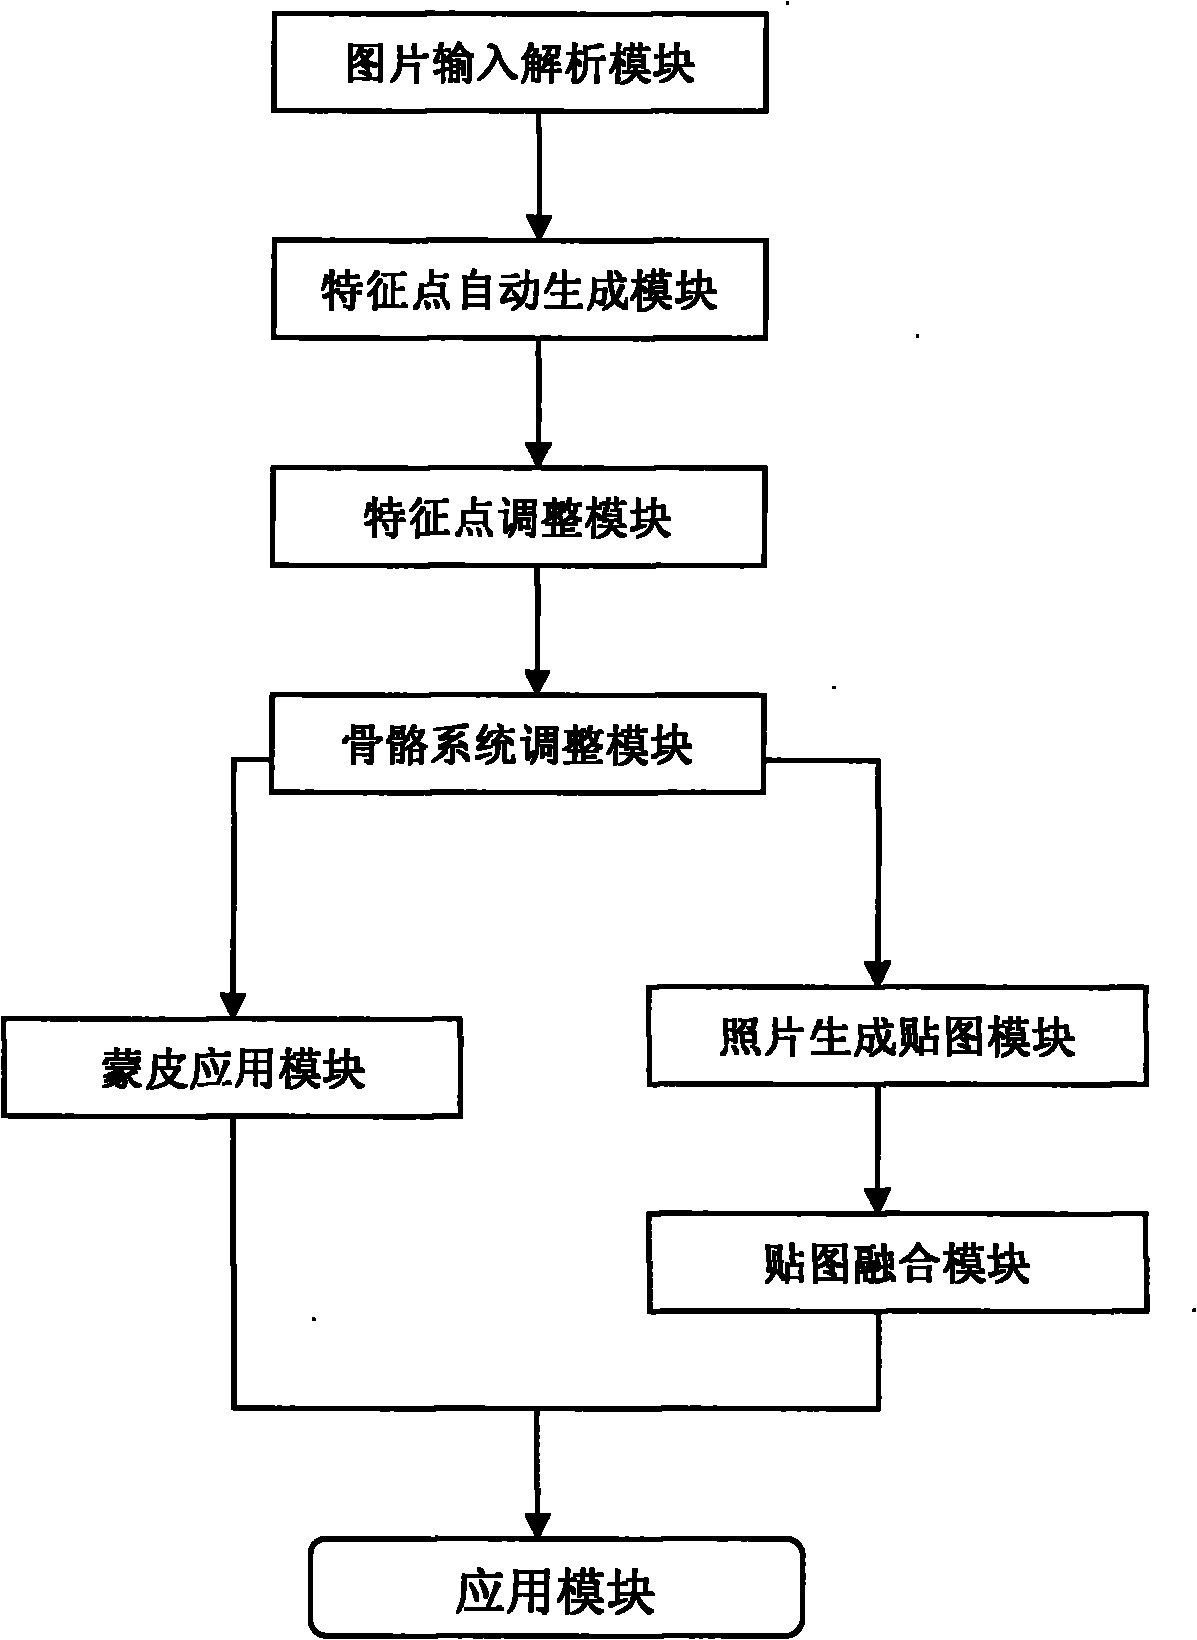 System for automatically generating three-dimensional figure of picture for game